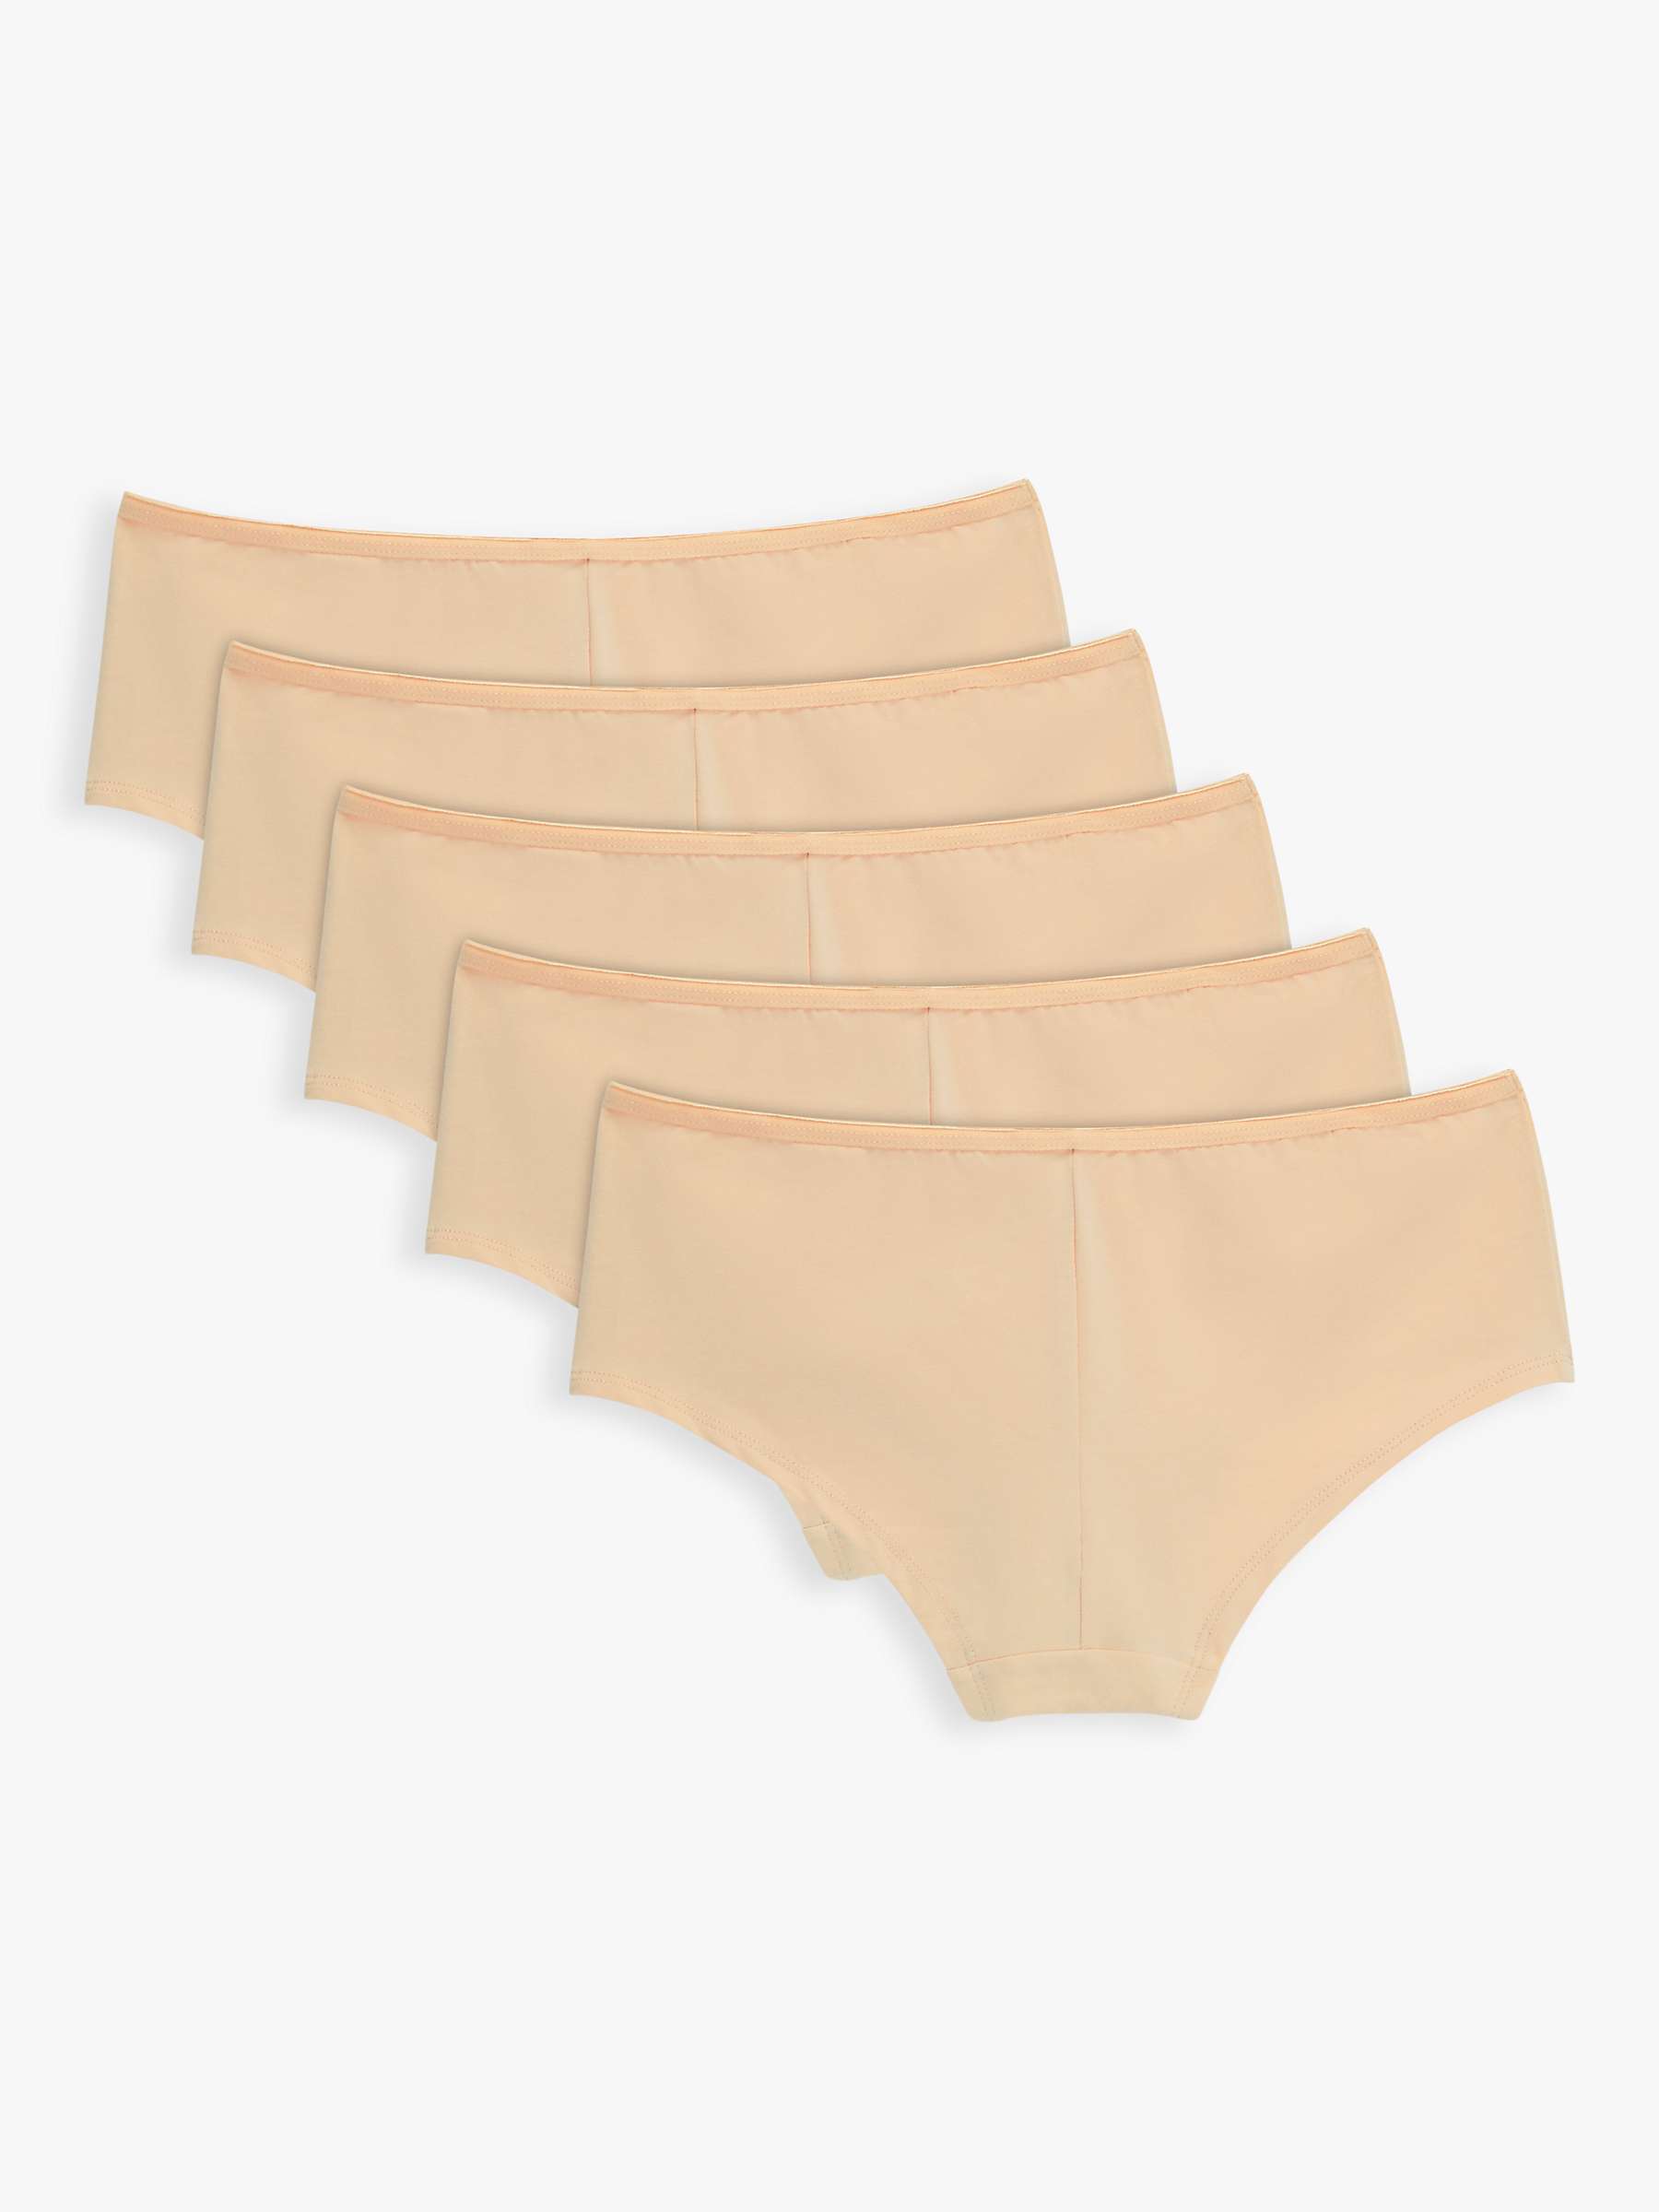 Buy John Lewis ANYDAY Cotton Shorts, Pack of 5 Online at johnlewis.com